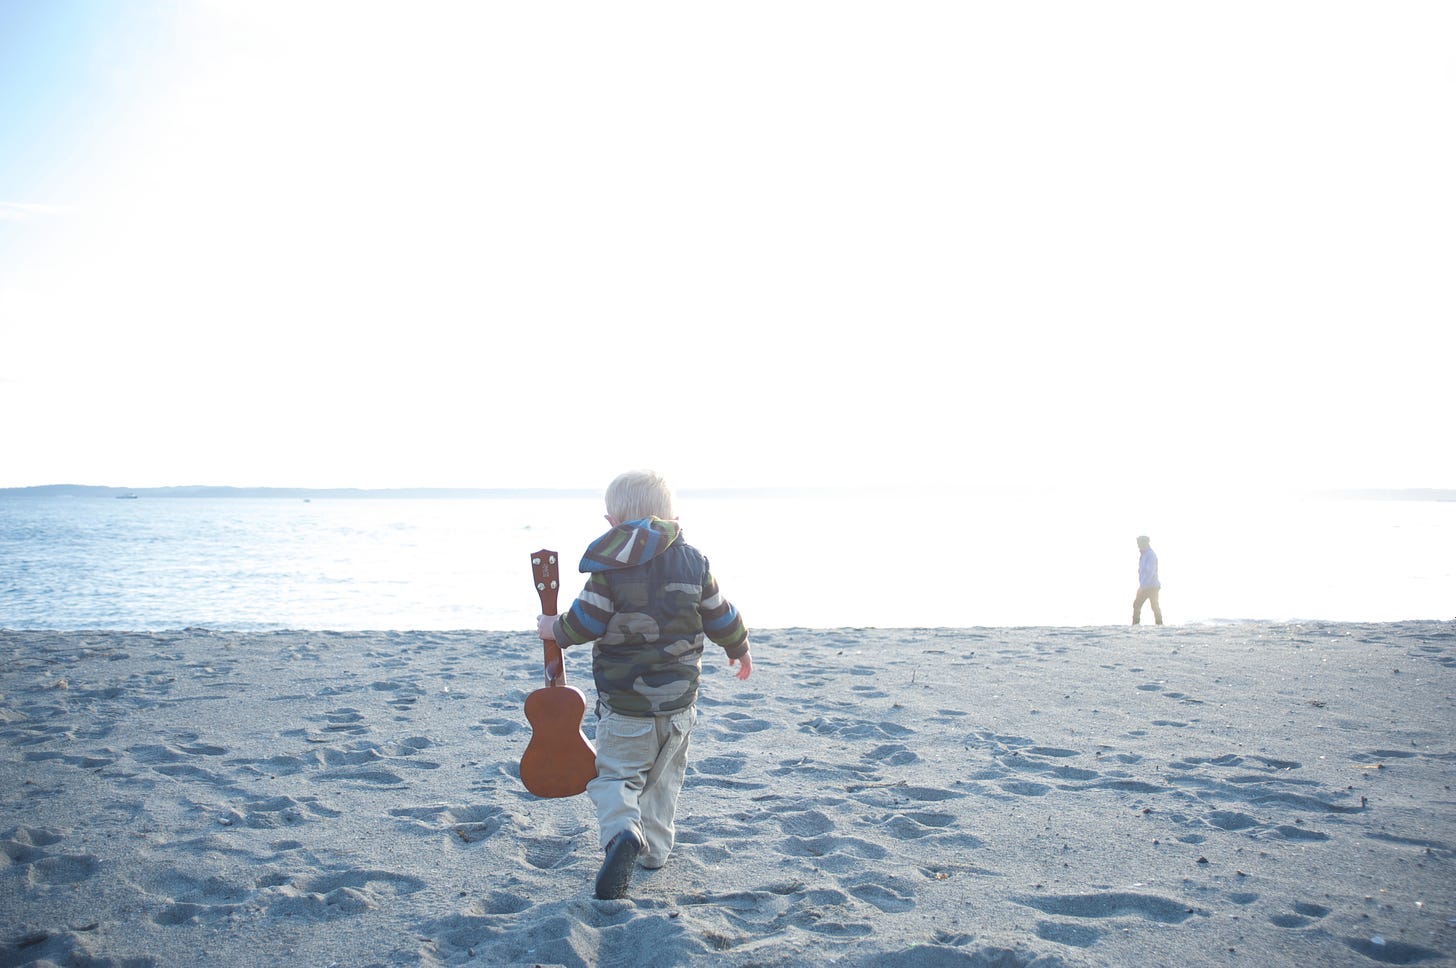 Child in a camouflage coat carrying a toy guitar on a beach